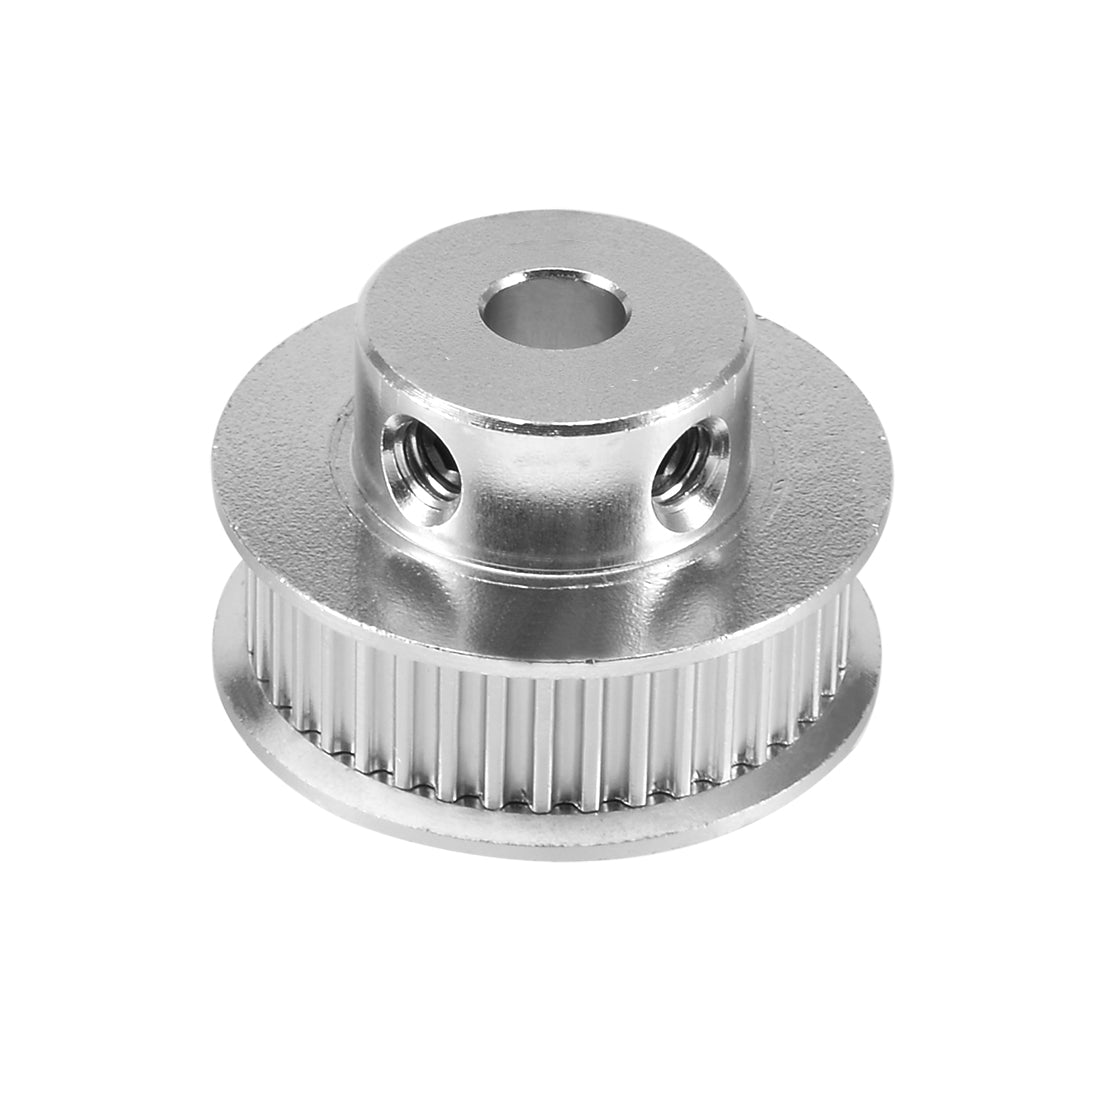 uxcell Uxcell Aluminum 36 Teeth 5mm Bore 2mm Pitch Timing Belt Pulley